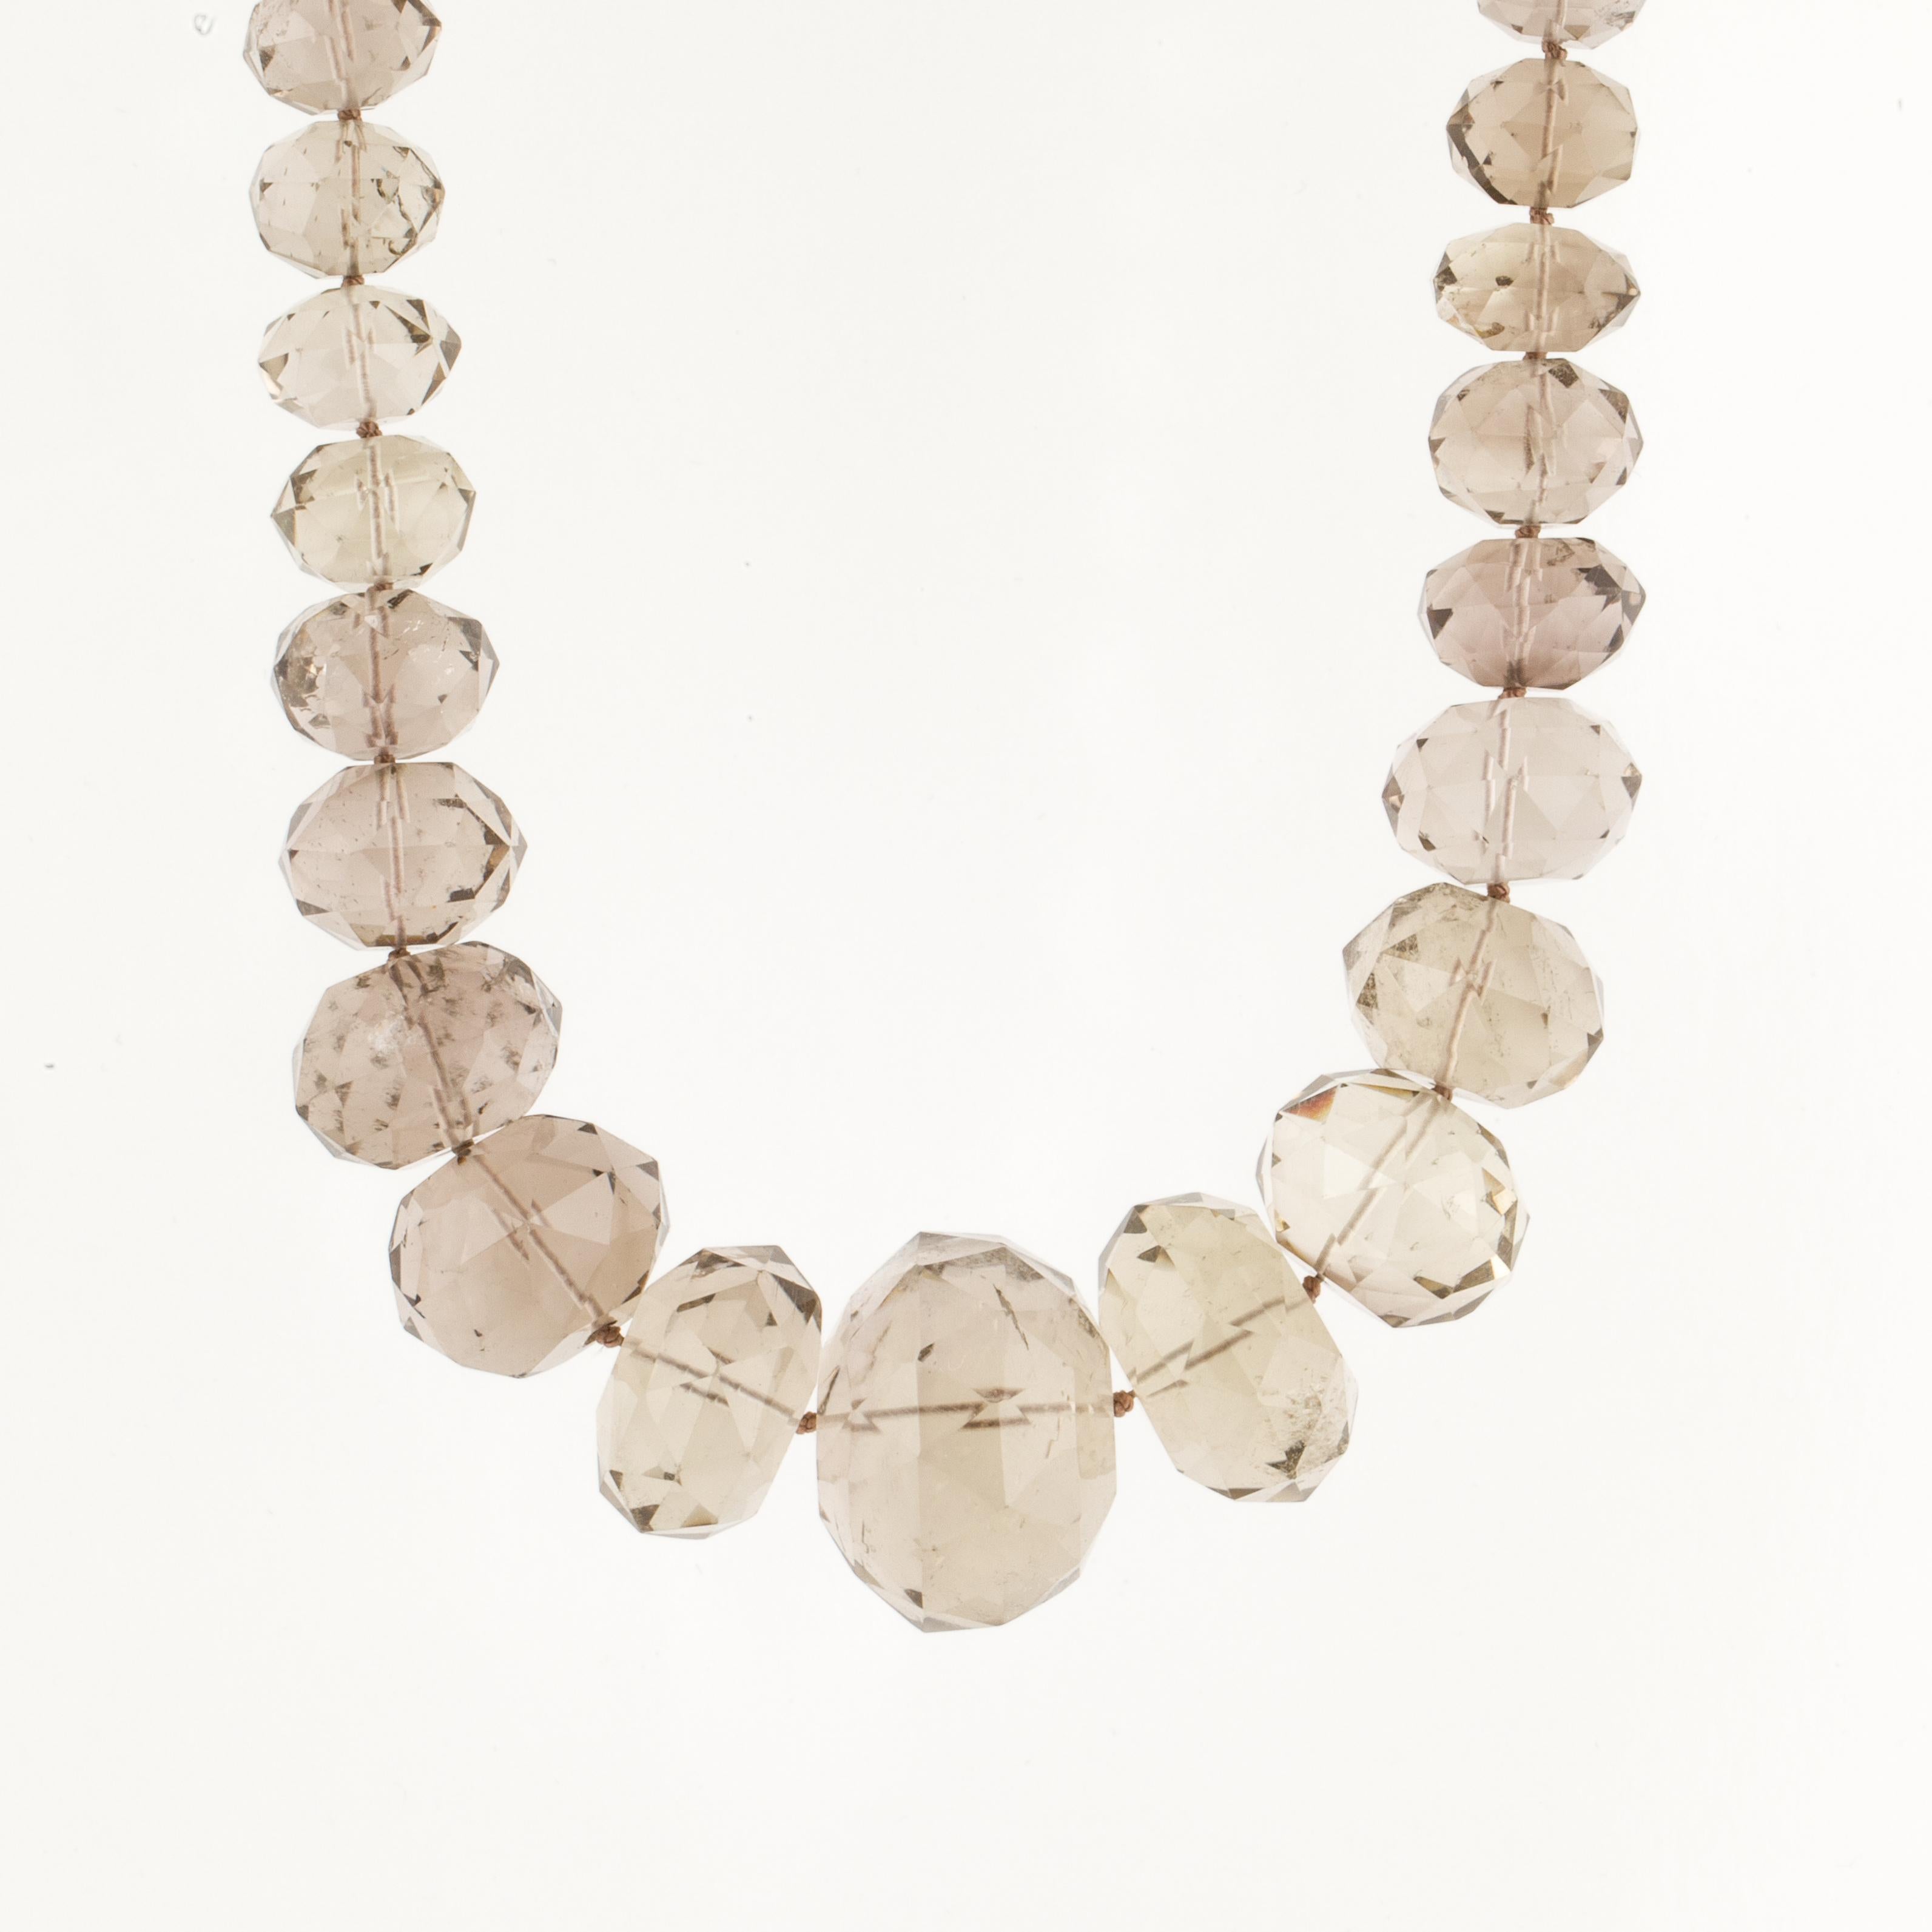 Bead necklace featuring graduated faceted smokey quartz beads and a 14K yellow gold clasp.  The necklace measures 18 1/4 inches long and the largest bead measures 1 1/8 inches across.  